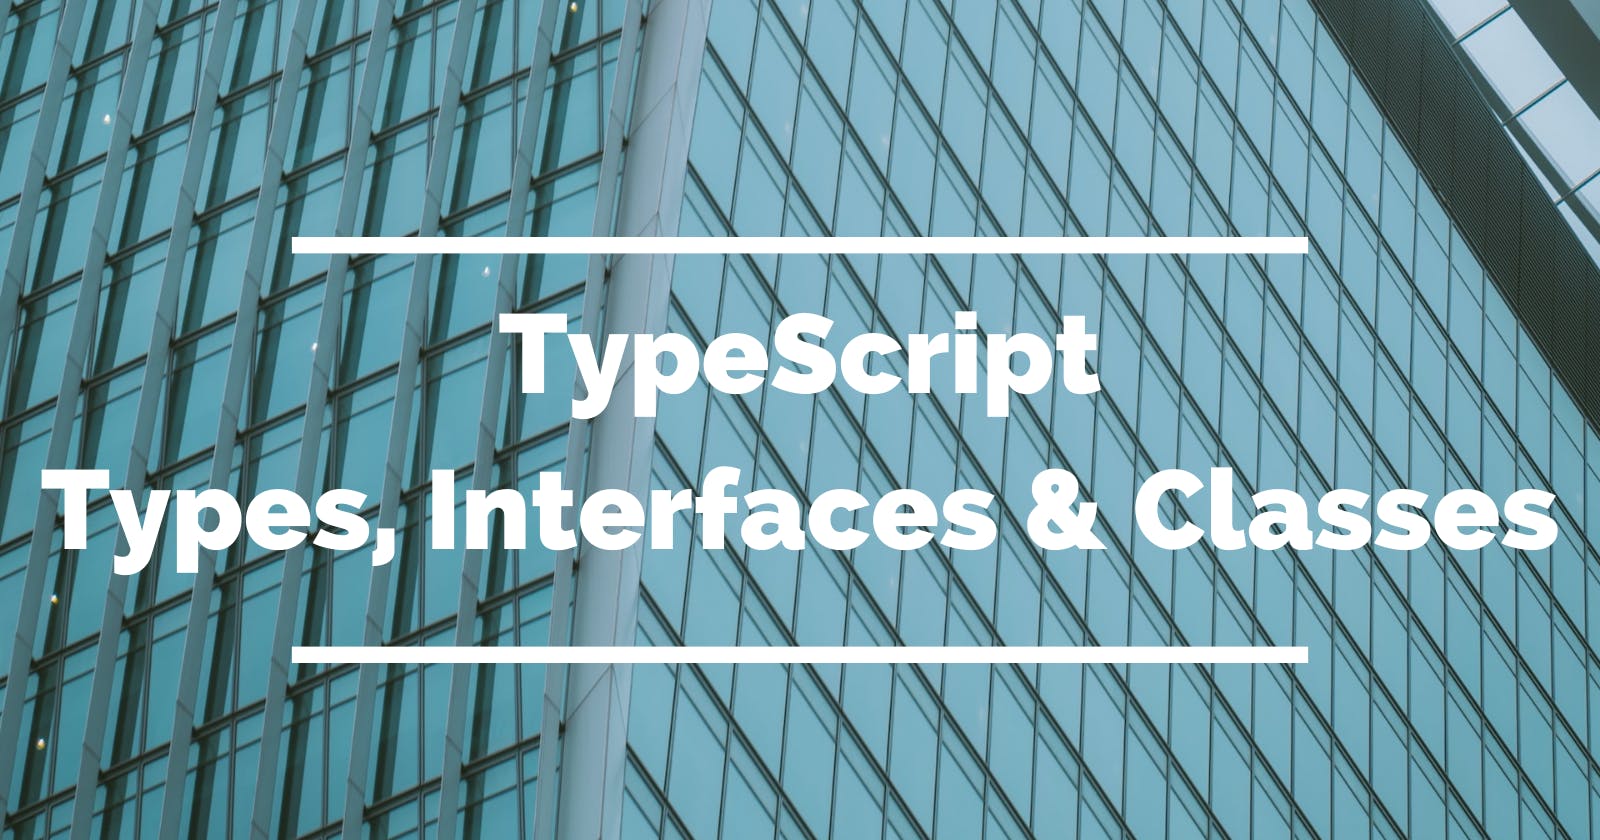 TypeScript: types, interfaces and classes